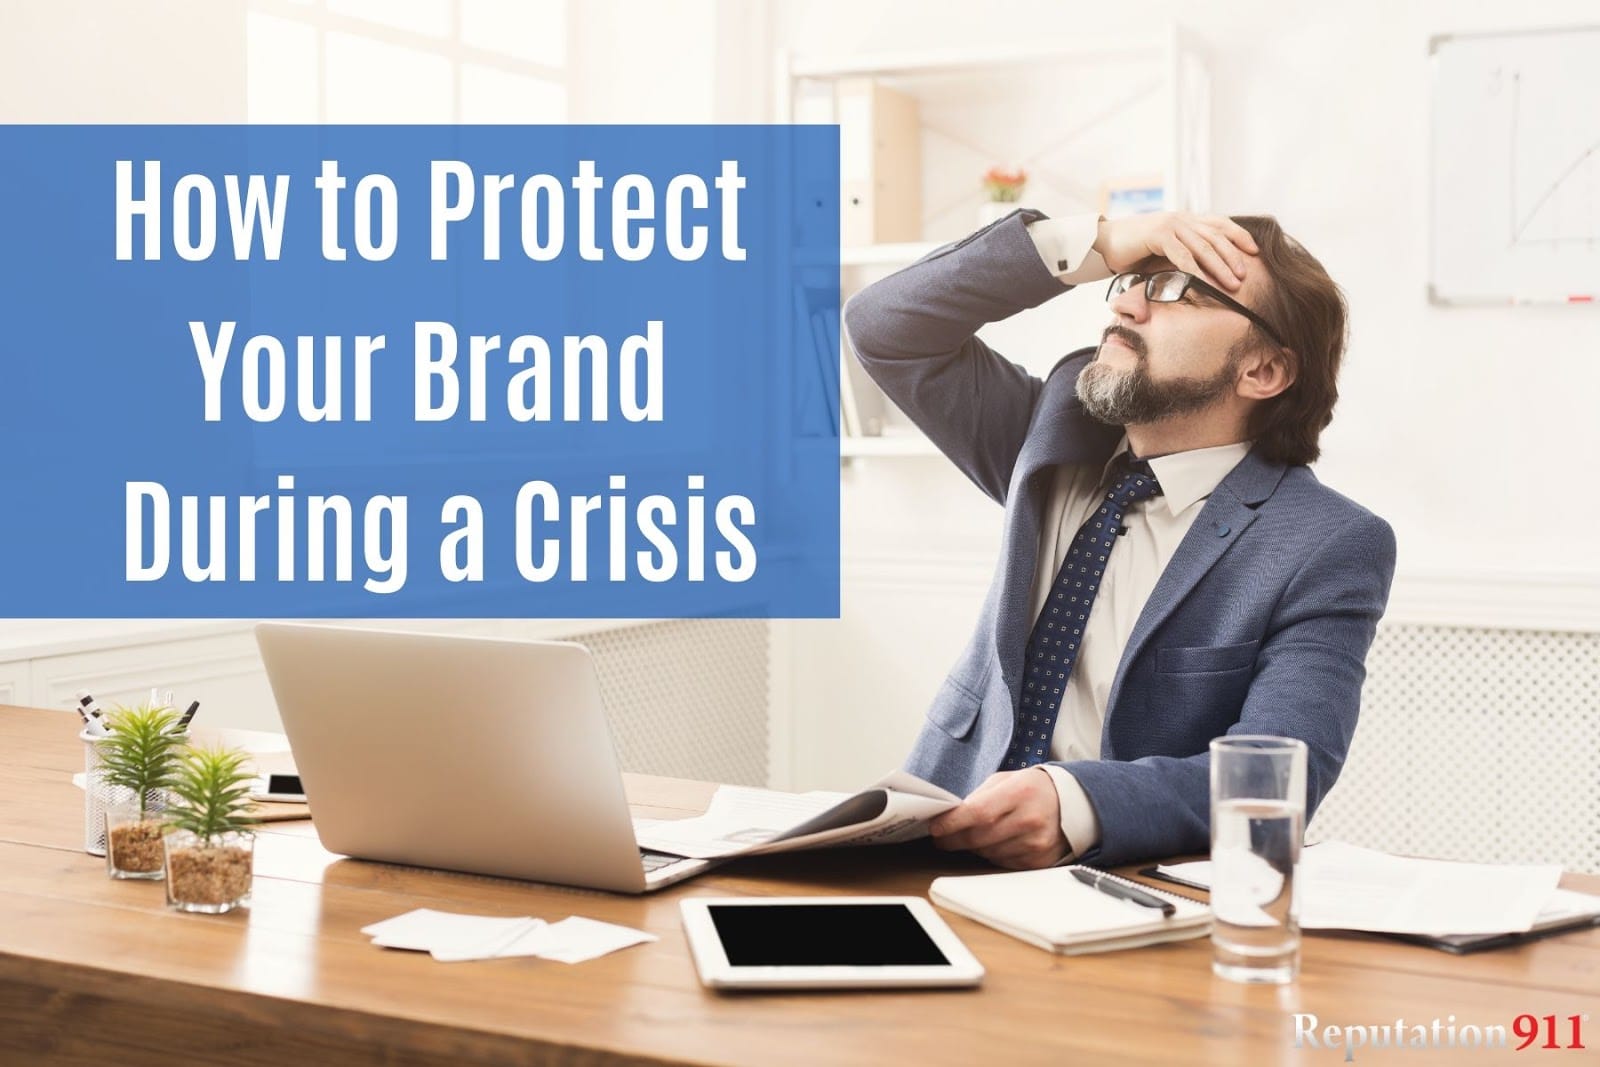 How to Protect Your Brand During a Crisis